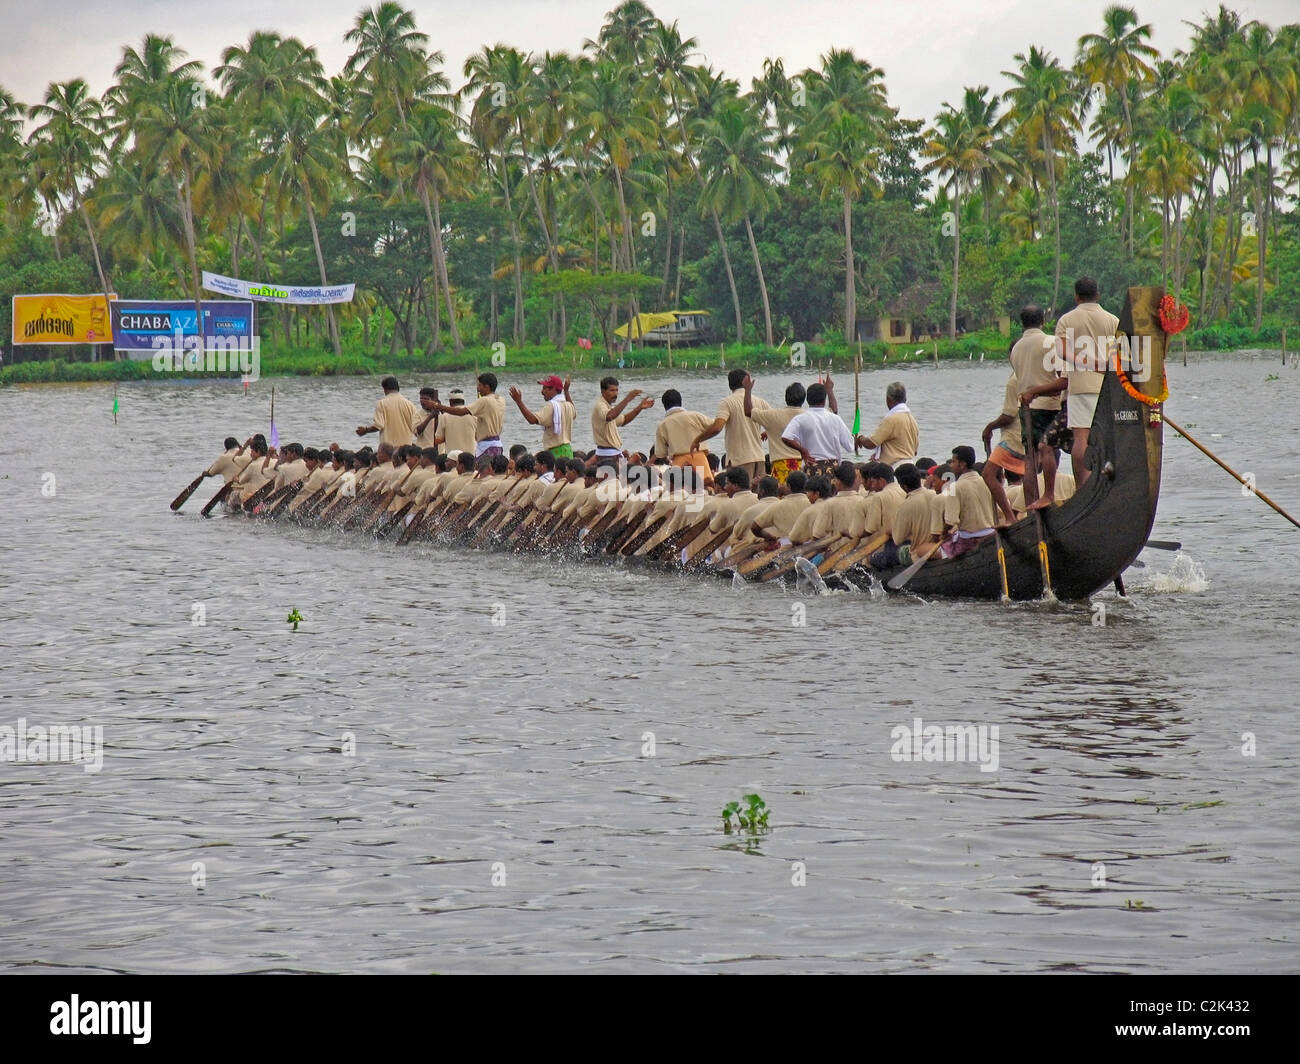 Snake Boat Race, a Colorful water sport in Kerala, Alleppy (Alappuzha), India Stock Photo